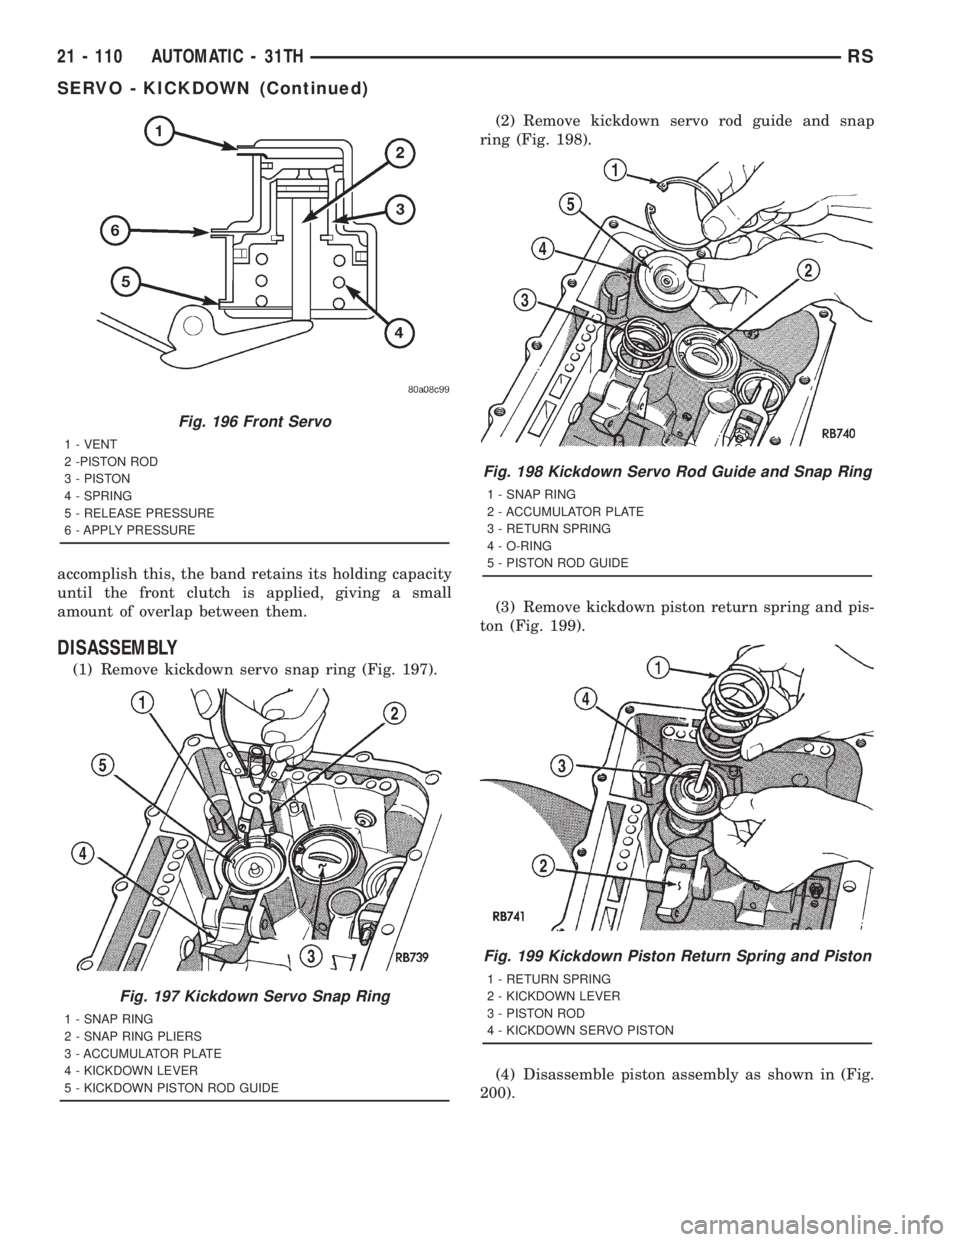 CHRYSLER VOYAGER 2001  Service Manual accomplish this, the band retains its holding capacity
until the front clutch is applied, giving a small
amount of overlap between them.
DISASSEMBLY
(1) Remove kickdown servo snap ring (Fig. 197).(2) 